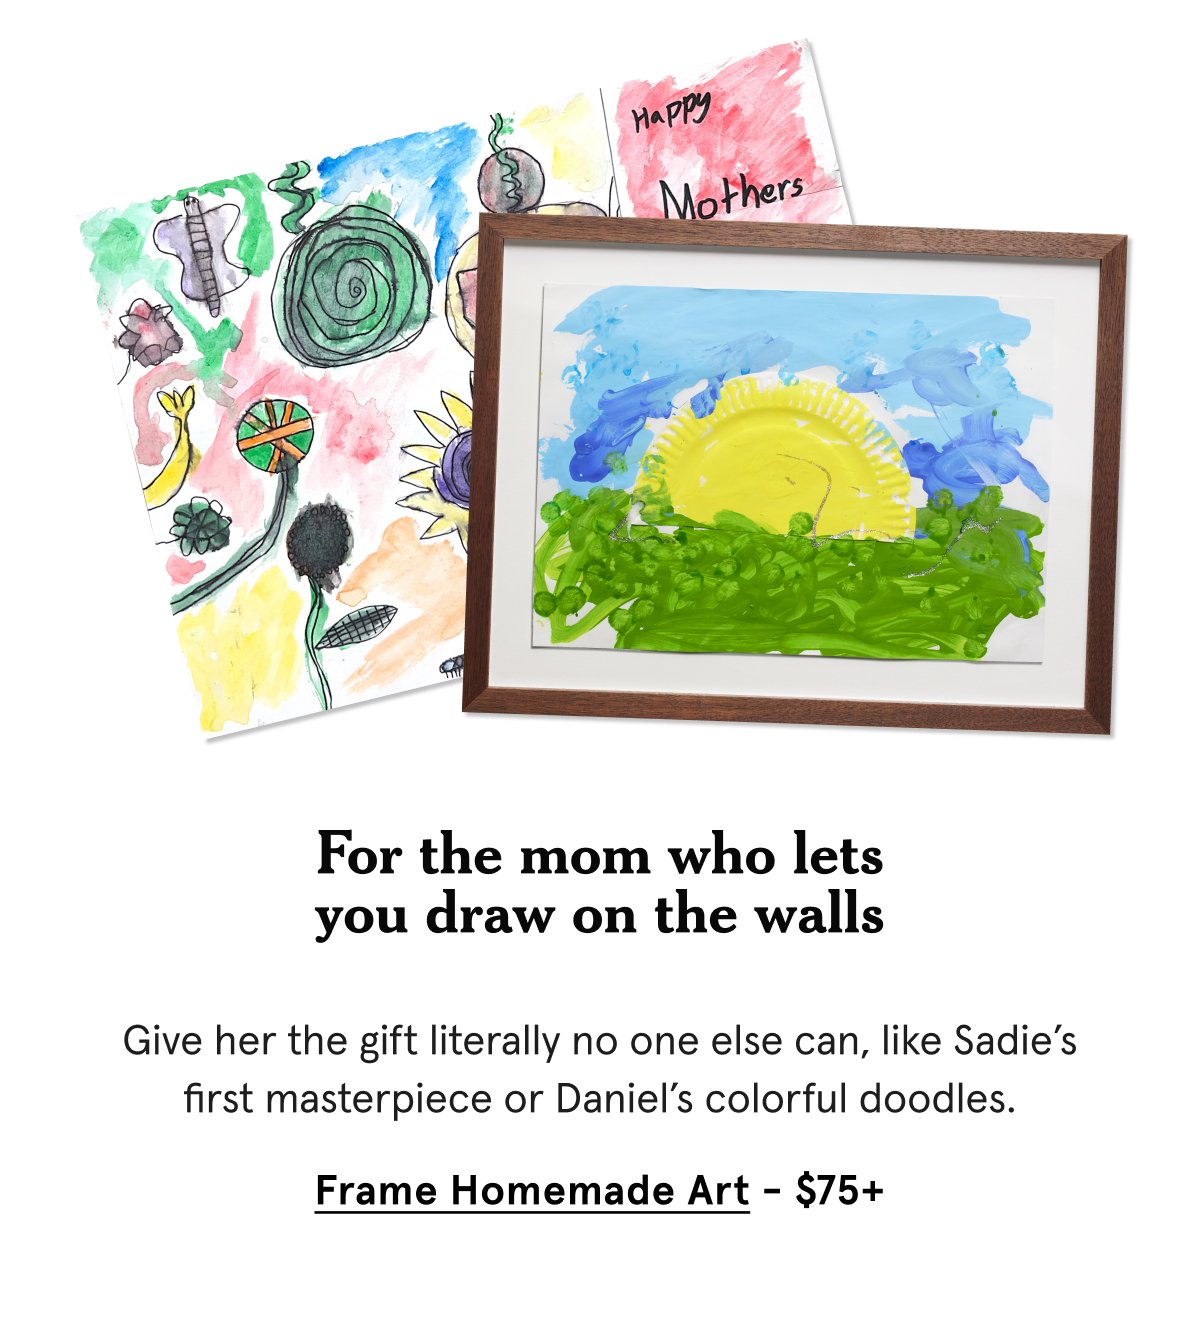 Give her the gift literally no one else can, like Sadie’s first masterpiece or Daniel’s colorful doodles.